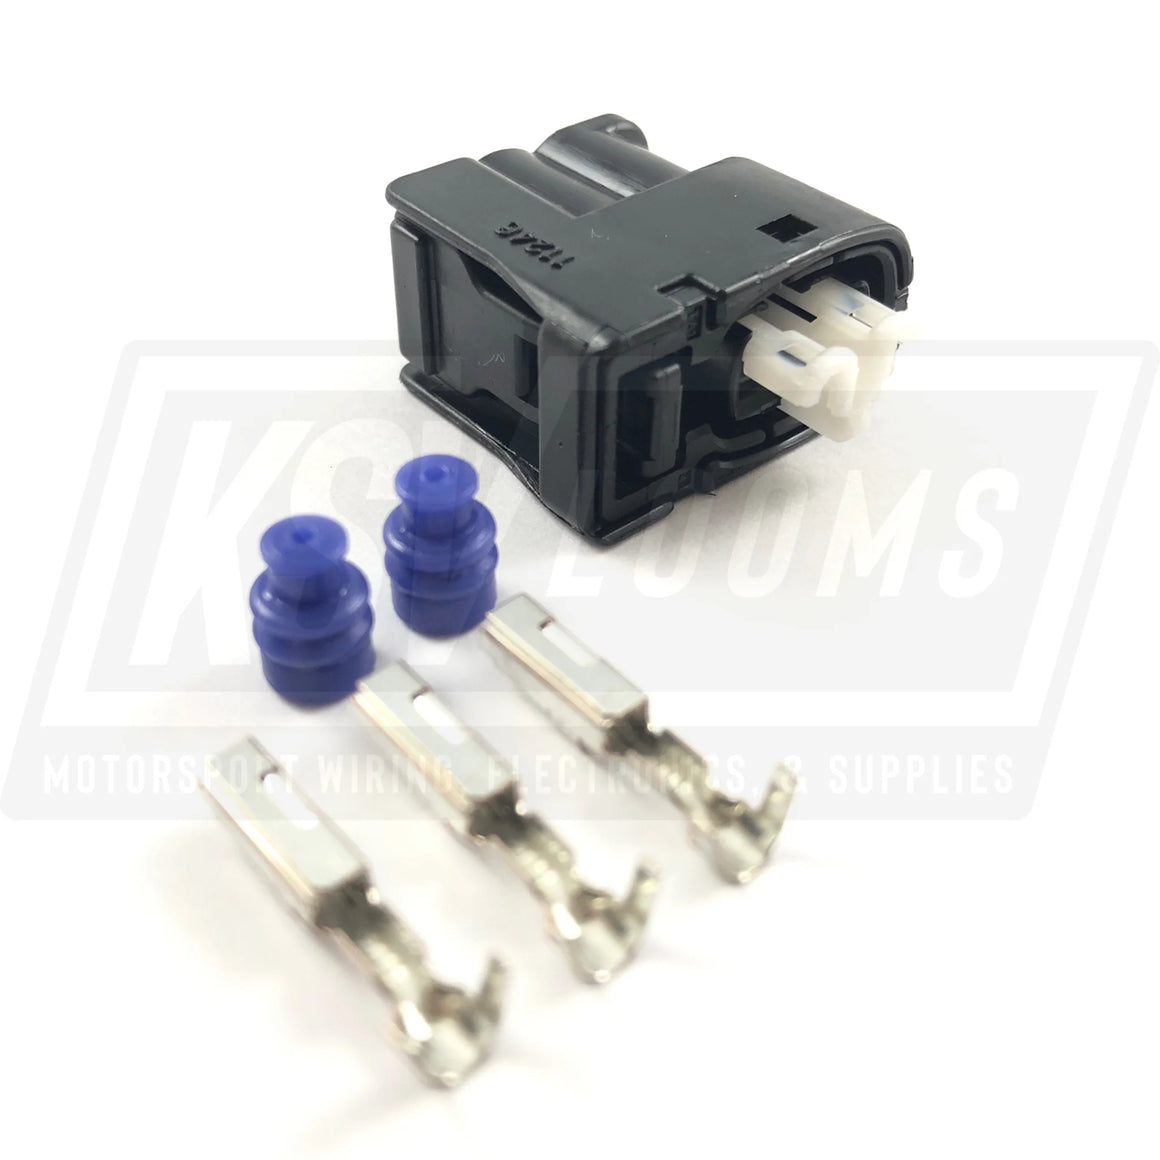 2-Way Connector Kit For Lexus Is300 2Jz-Ge Ignition Coil Pack (22-20 Awg)